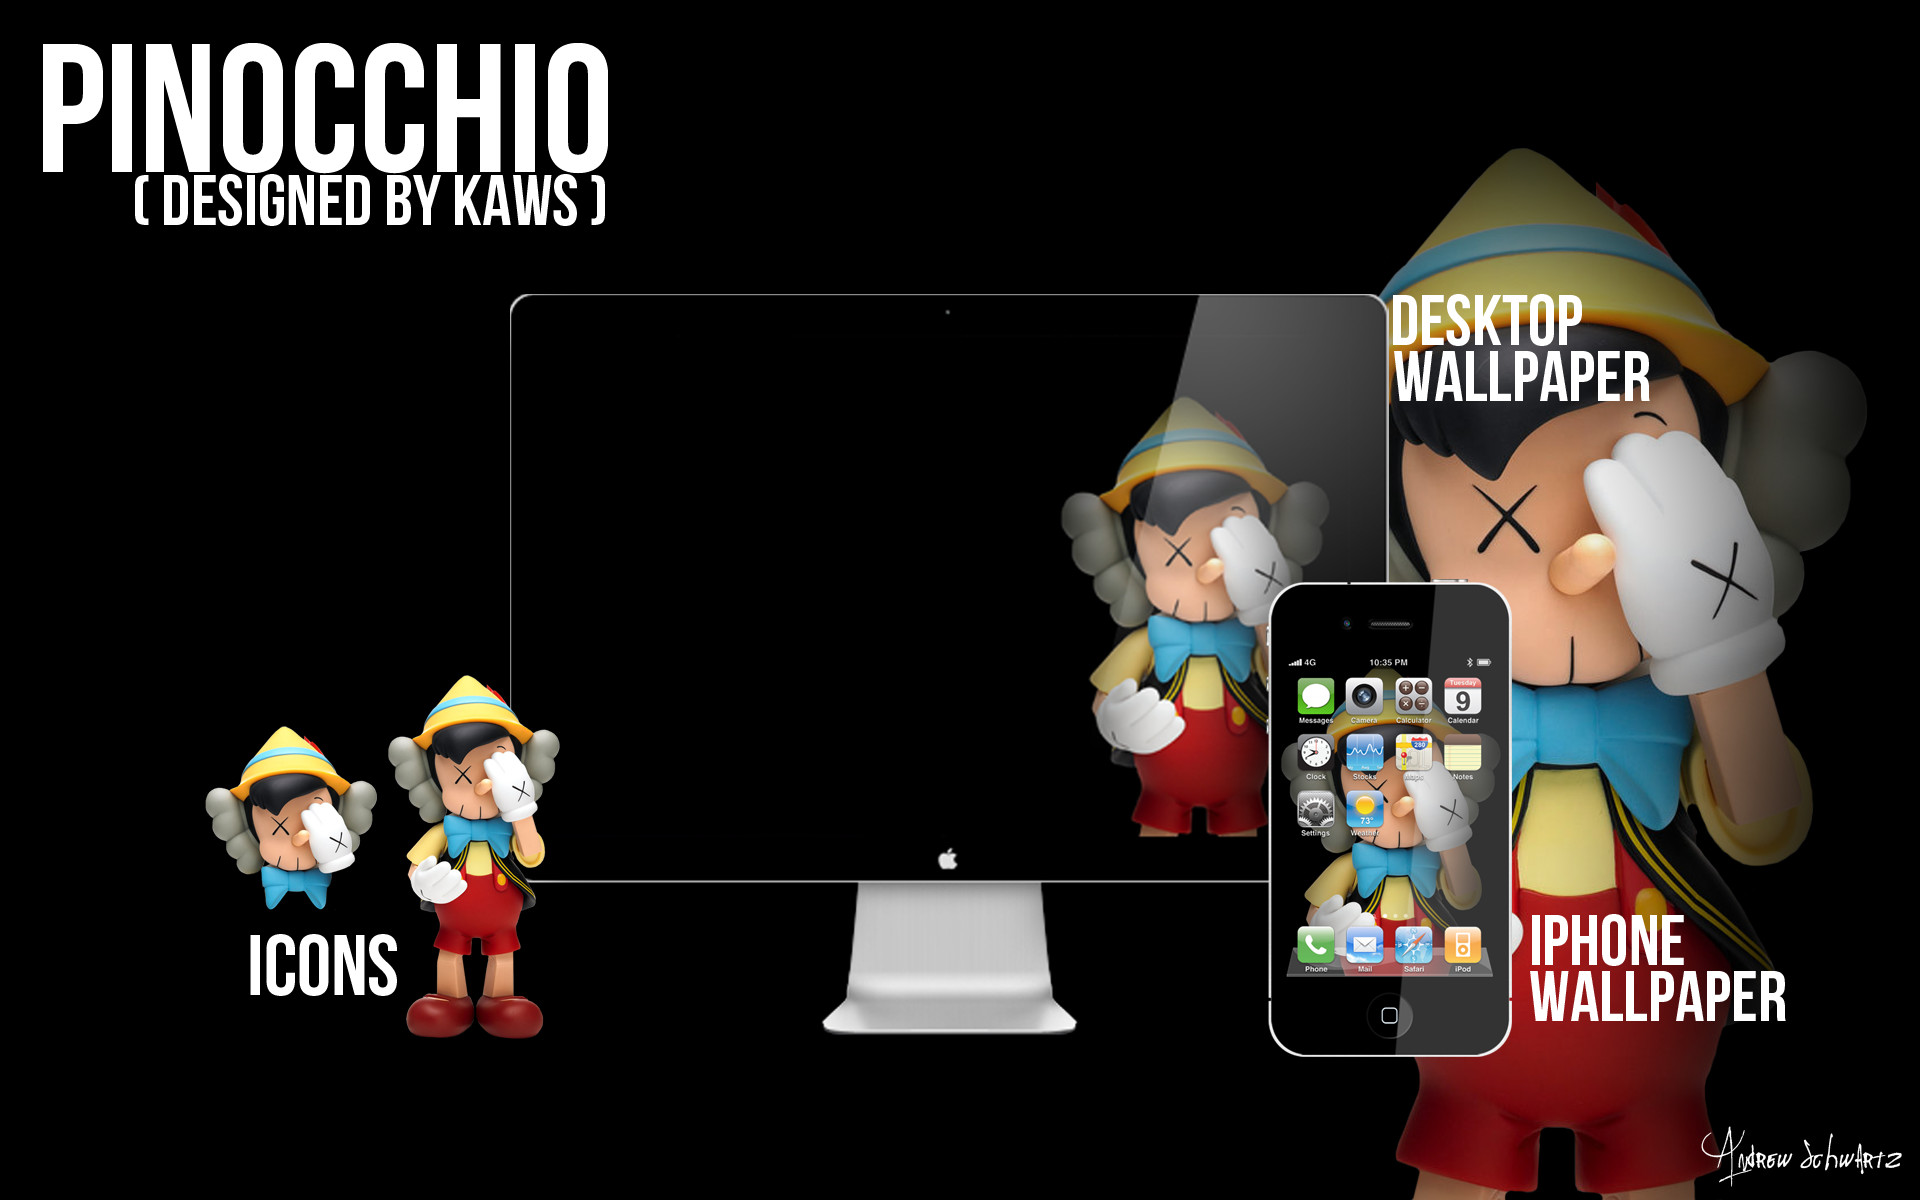 KAWS Pinocchio Wallpaper and Icons by acvschwartz KAWS Pinocchio Wallpaper and Icons by acvschwartz